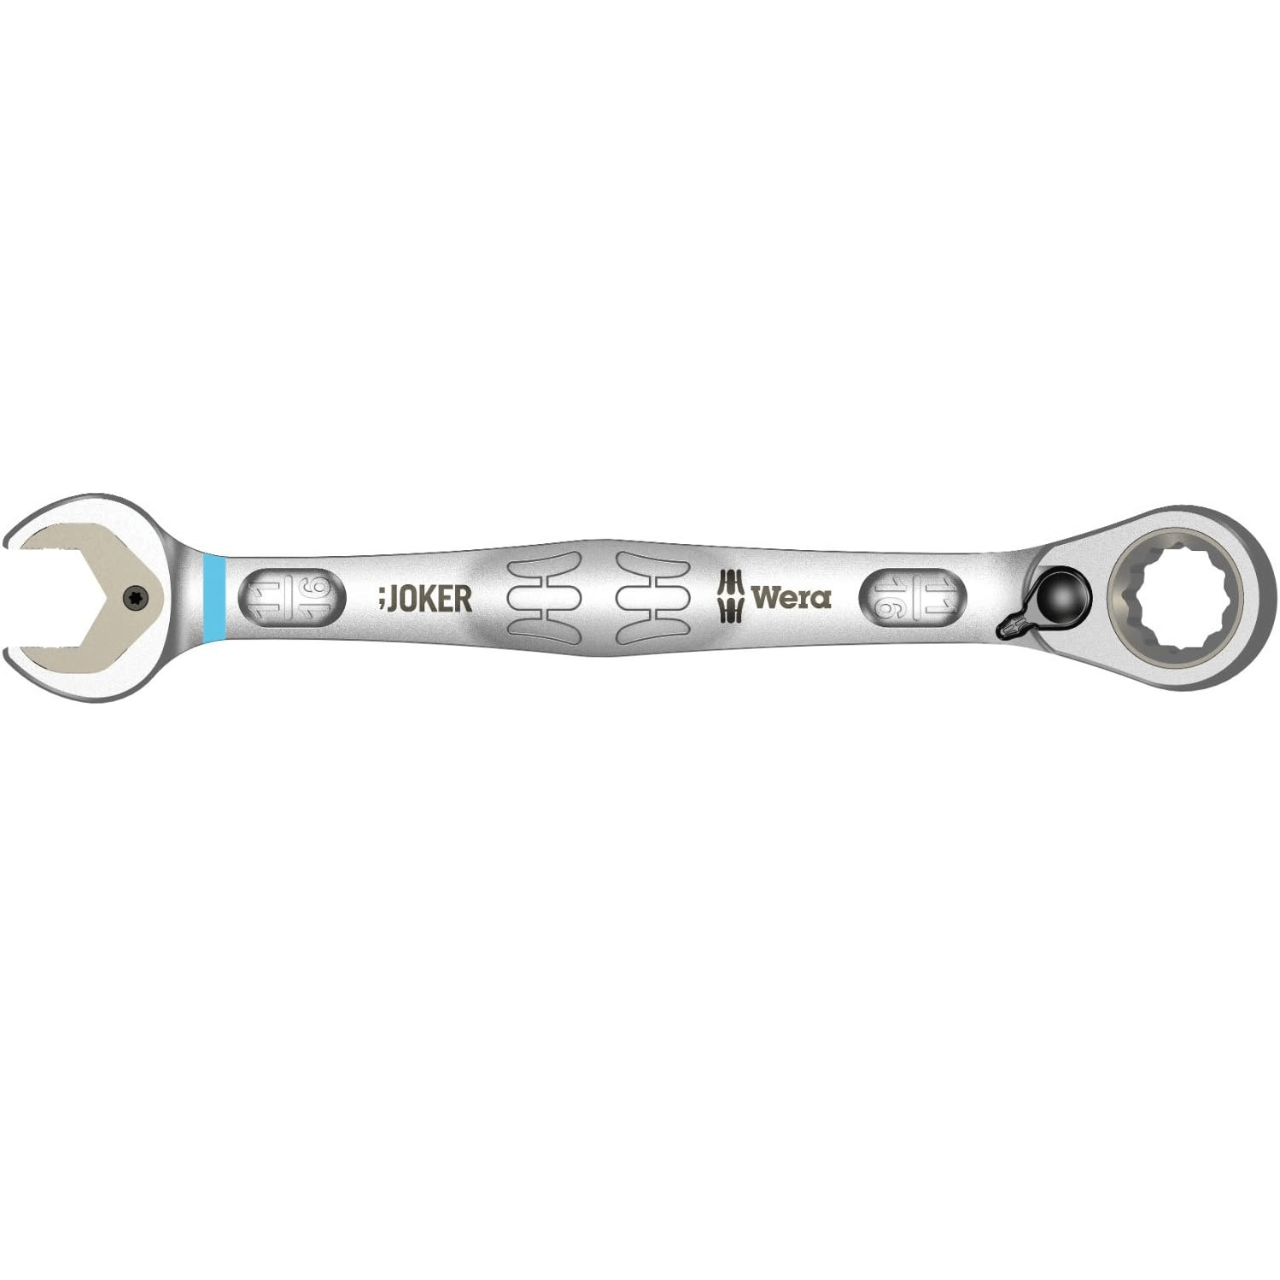 WERA 6000 Joker Ratcheting combination wrench, Imperial 11/16"x235mm